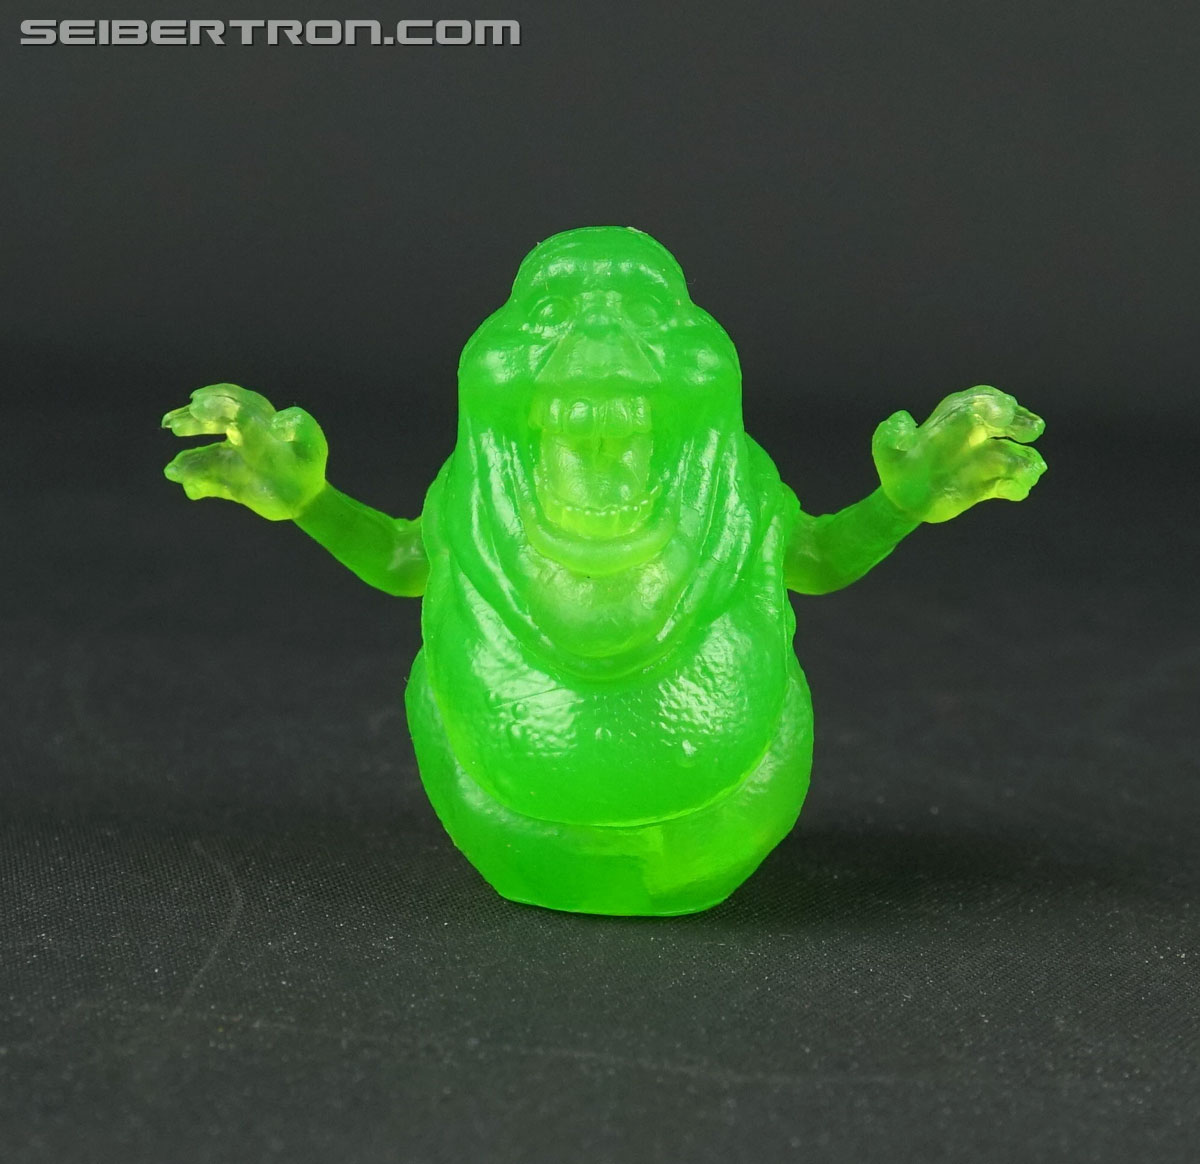 Ghostbusters X Transformers Slimer (Image #1 of 27)